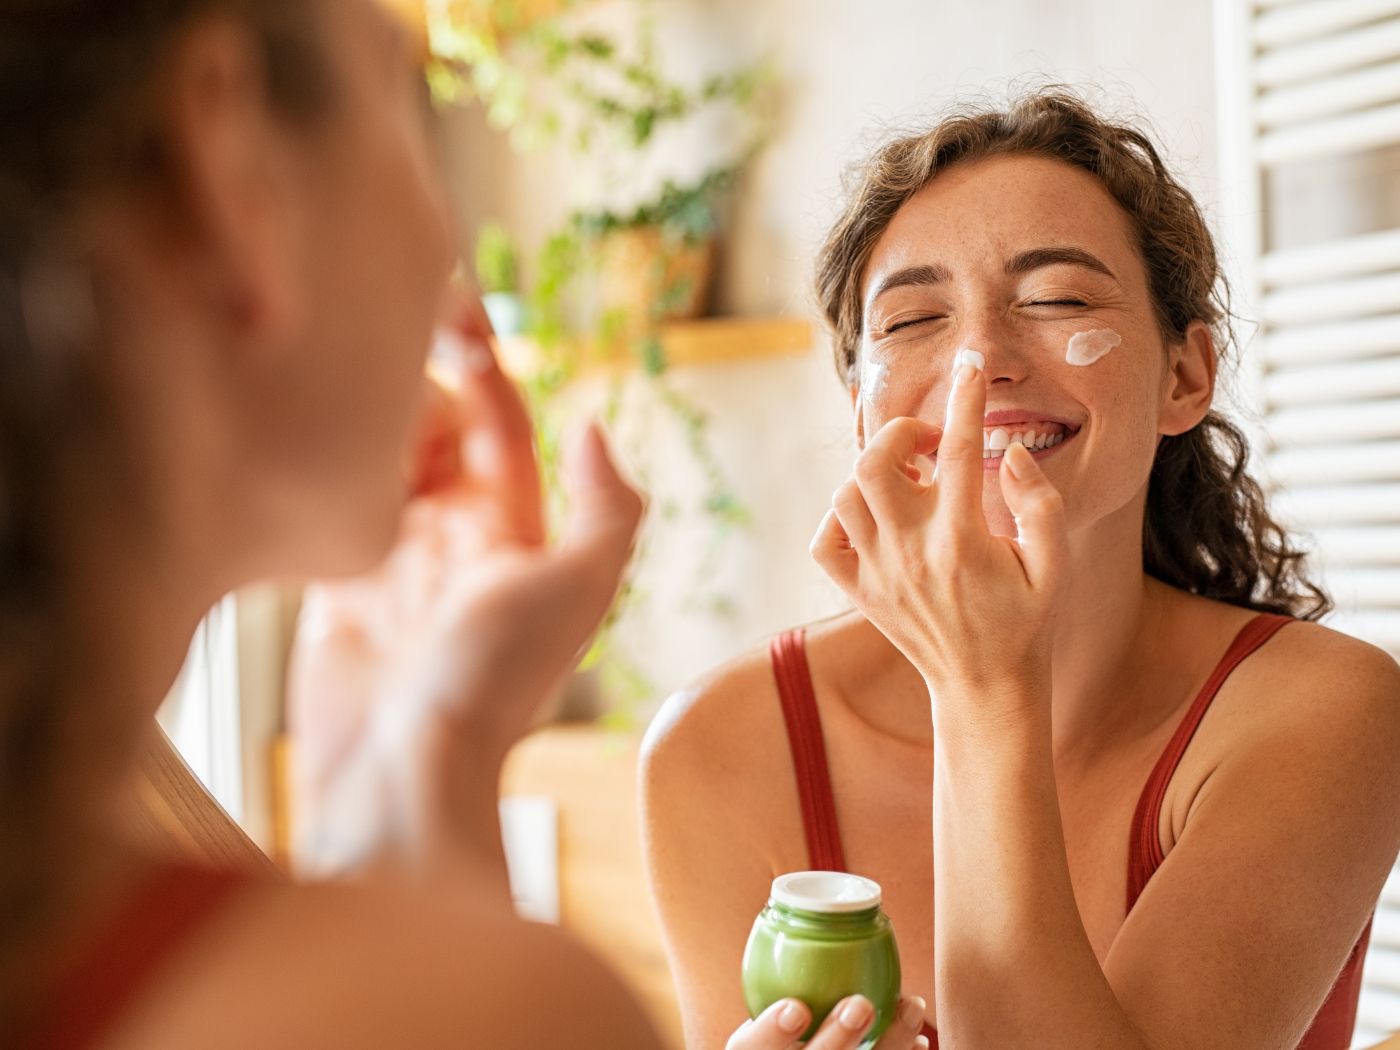 Your Daily Day Skincare Routine Order Matters – Here's Why